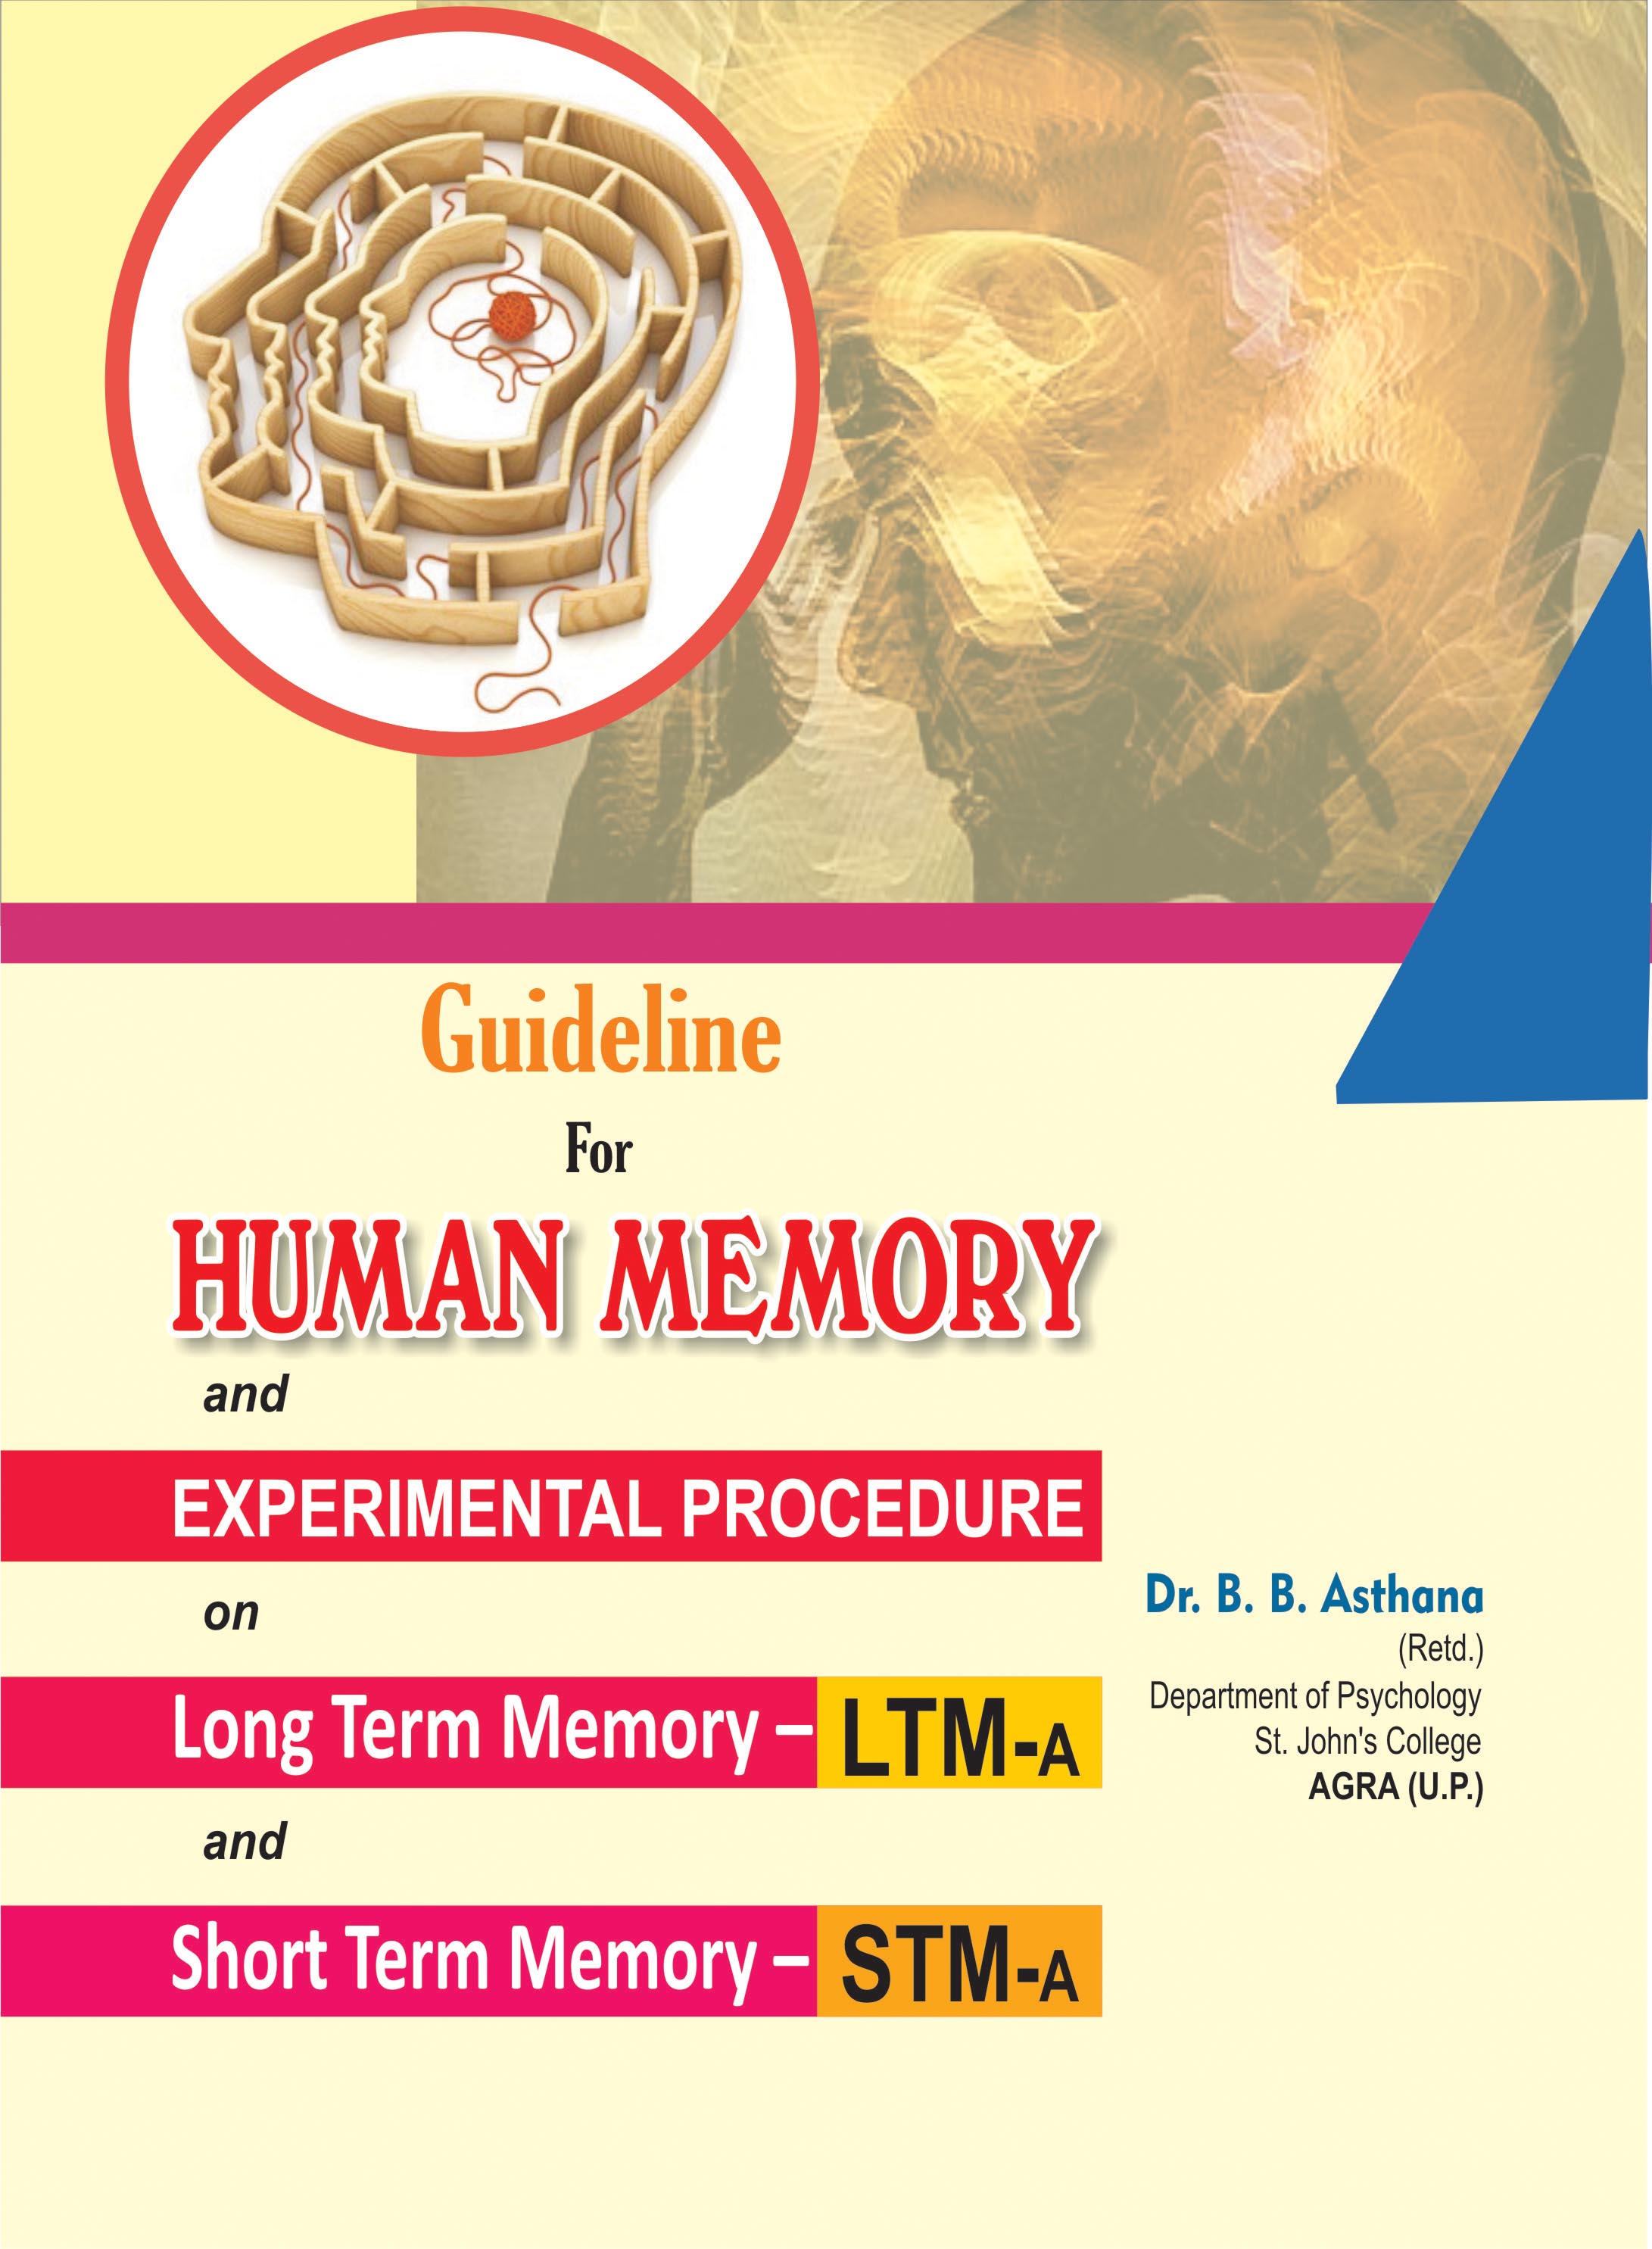 GUIDELINE-FOR-HUMAN-MEMORY-AND-EXPERIMENTAL-PROCEDURE-ON-LONG-TERM-MEMORY-AND-SHORT-TERM-MEMORY